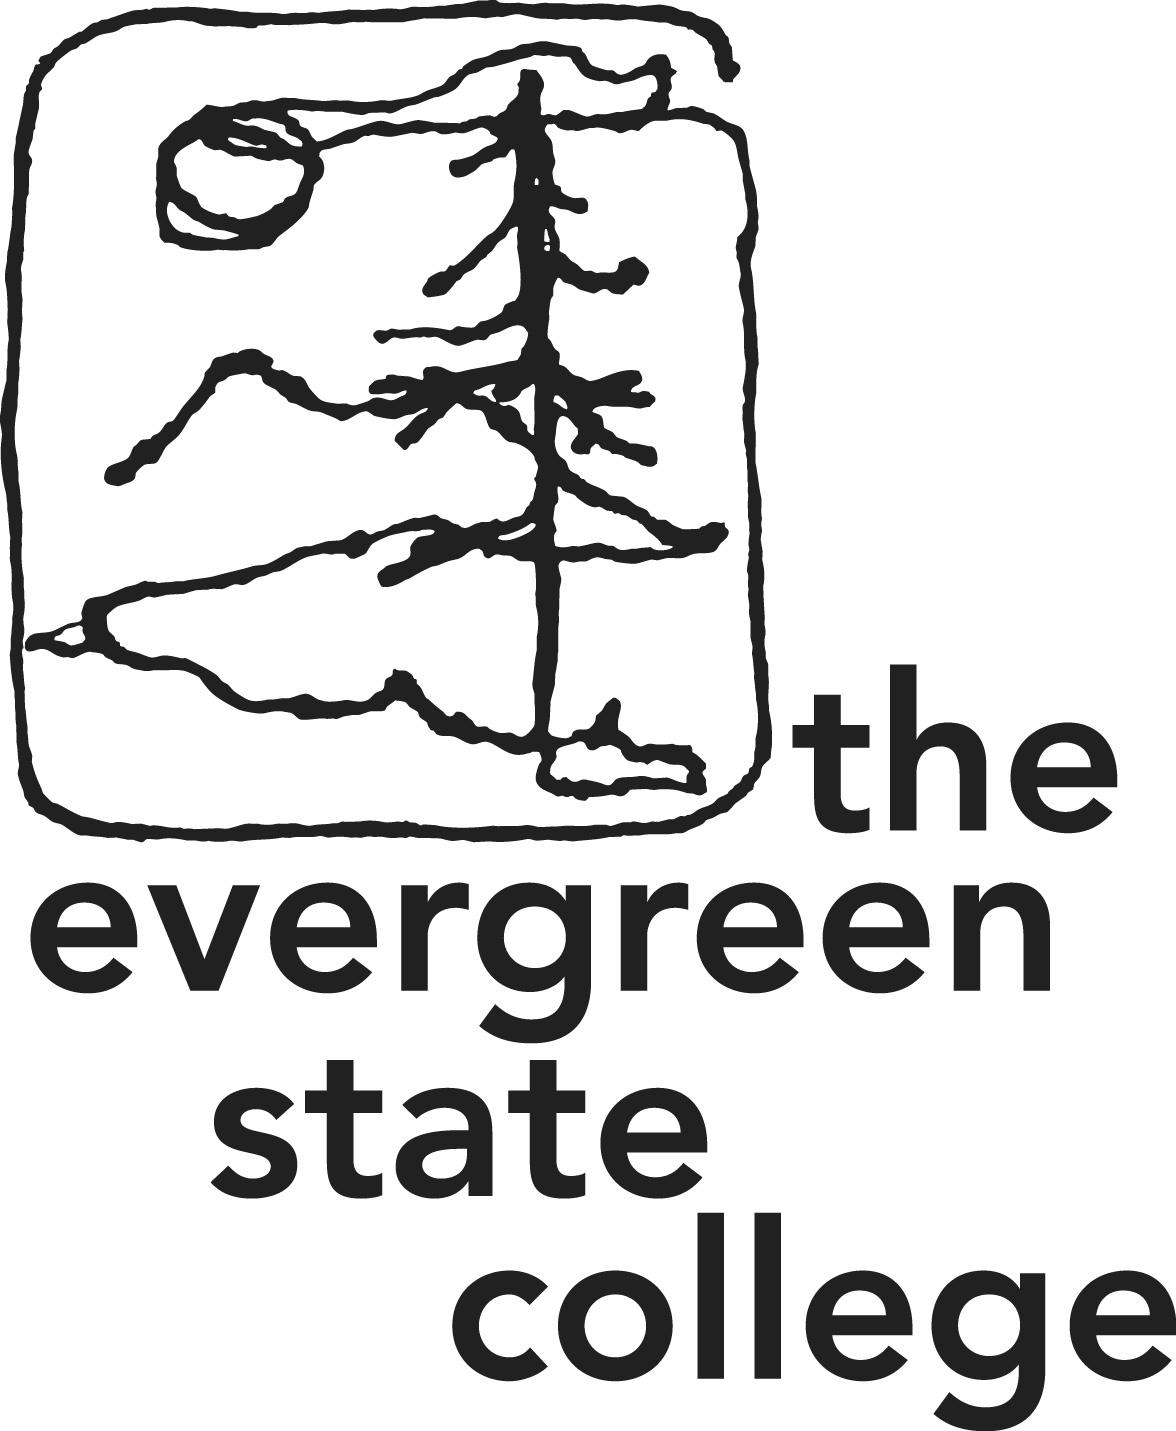 The Evergreen State College logo